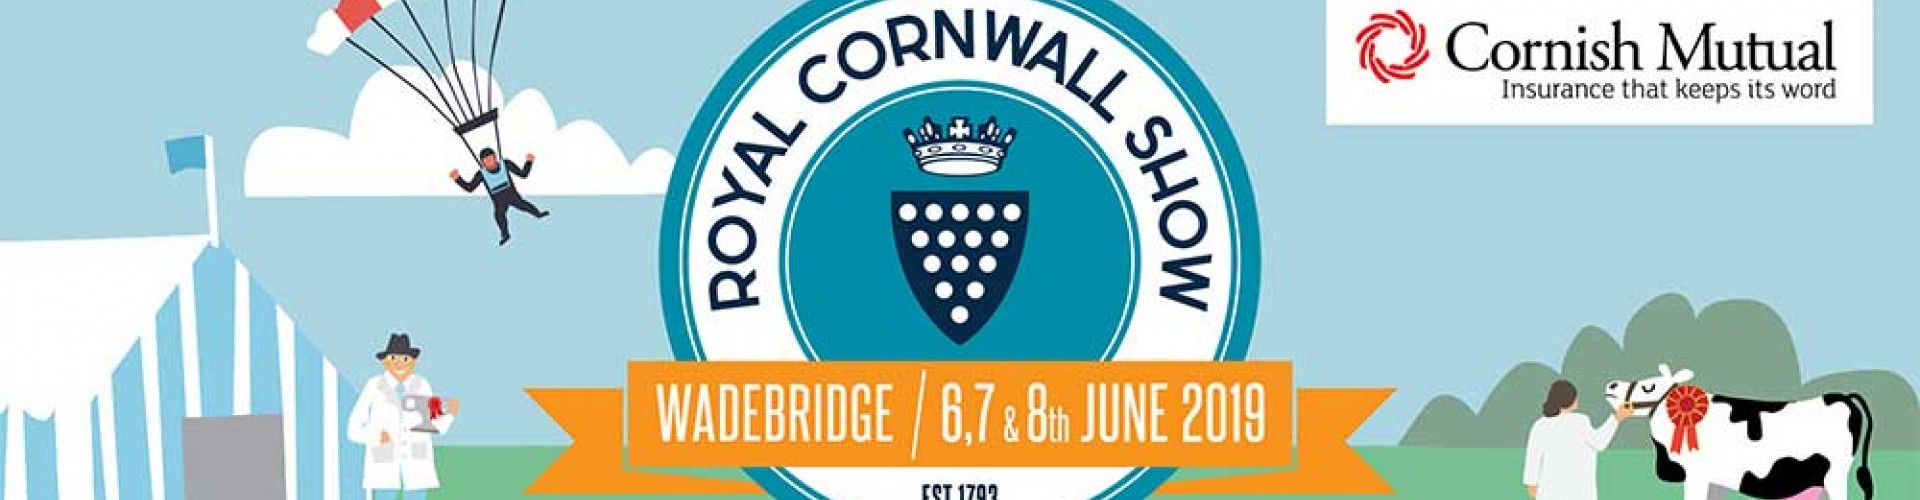 Graphic Royal Cornwall Show 2019|Busy outside stand|dog behind Top dog sign|Growth Hub team outside stand